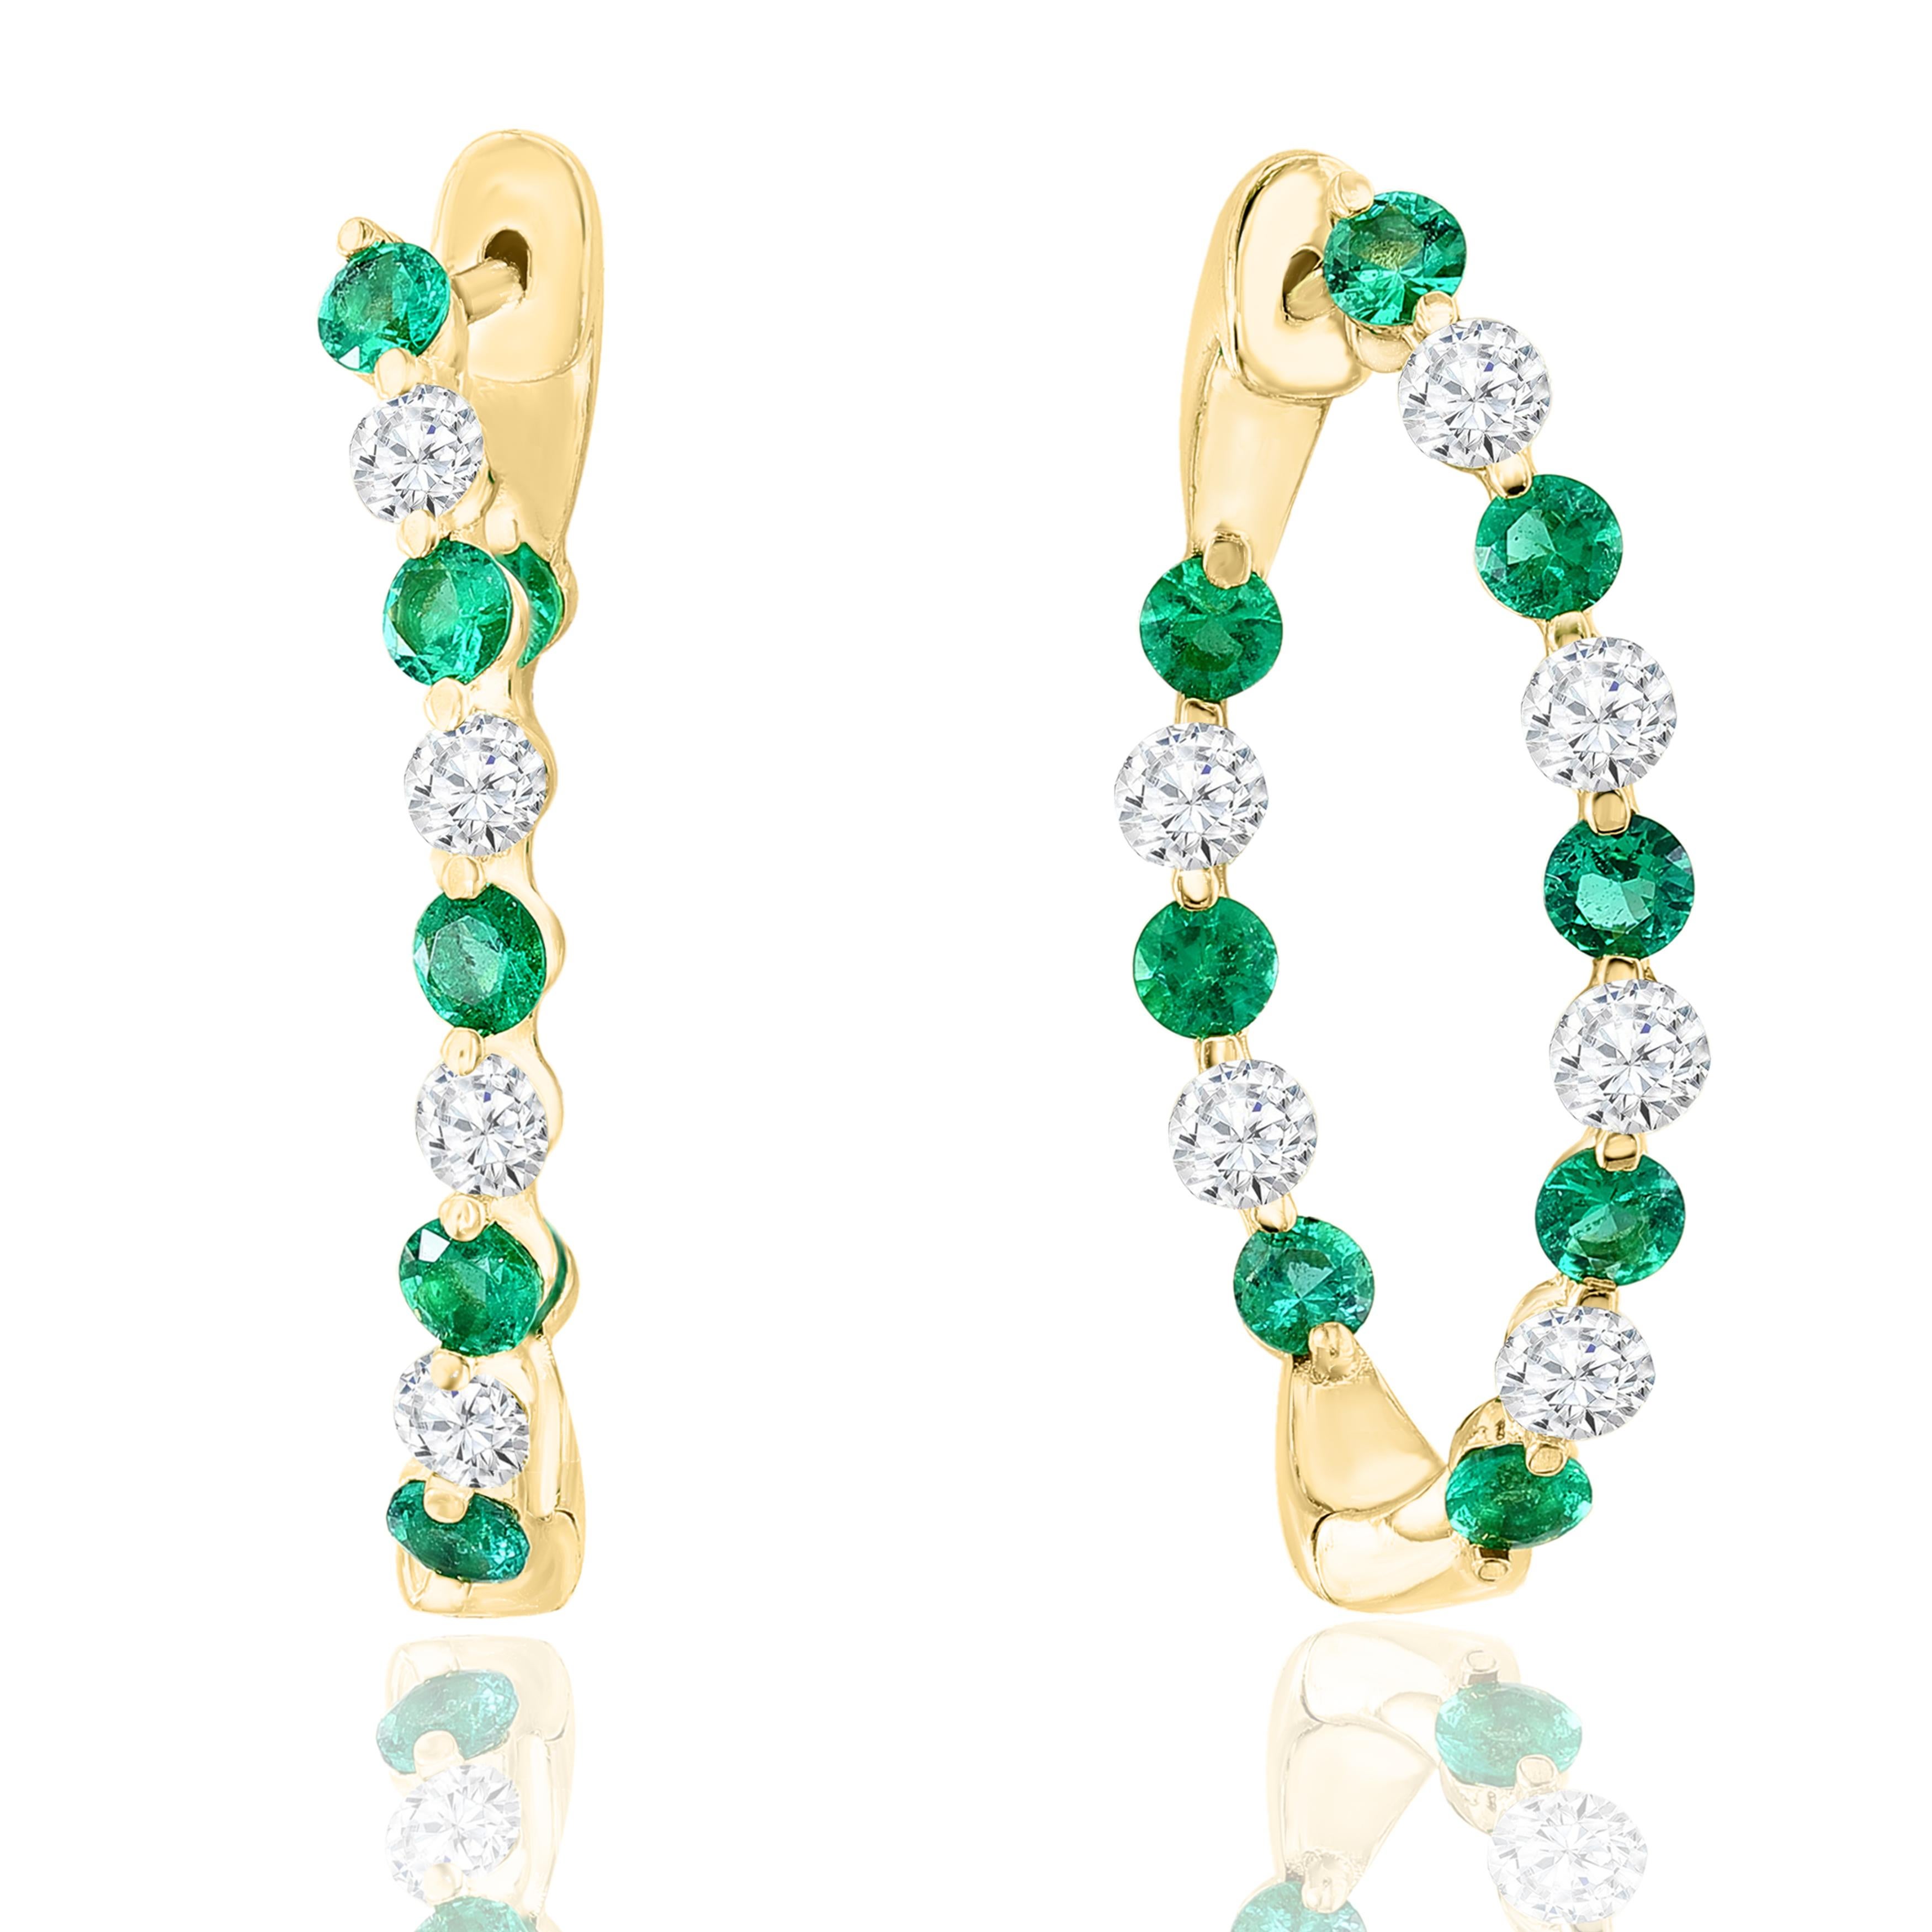 A chic and fashionable pair of hoop earrings showcasing brilliant-cut 16-round Emeralds alternating with diamonds, set in 14k yellow gold. 12 Round diamonds weigh 1.15 carats, and 16 Blue Sapphires weigh 1.41 carats. A beautiful piece of